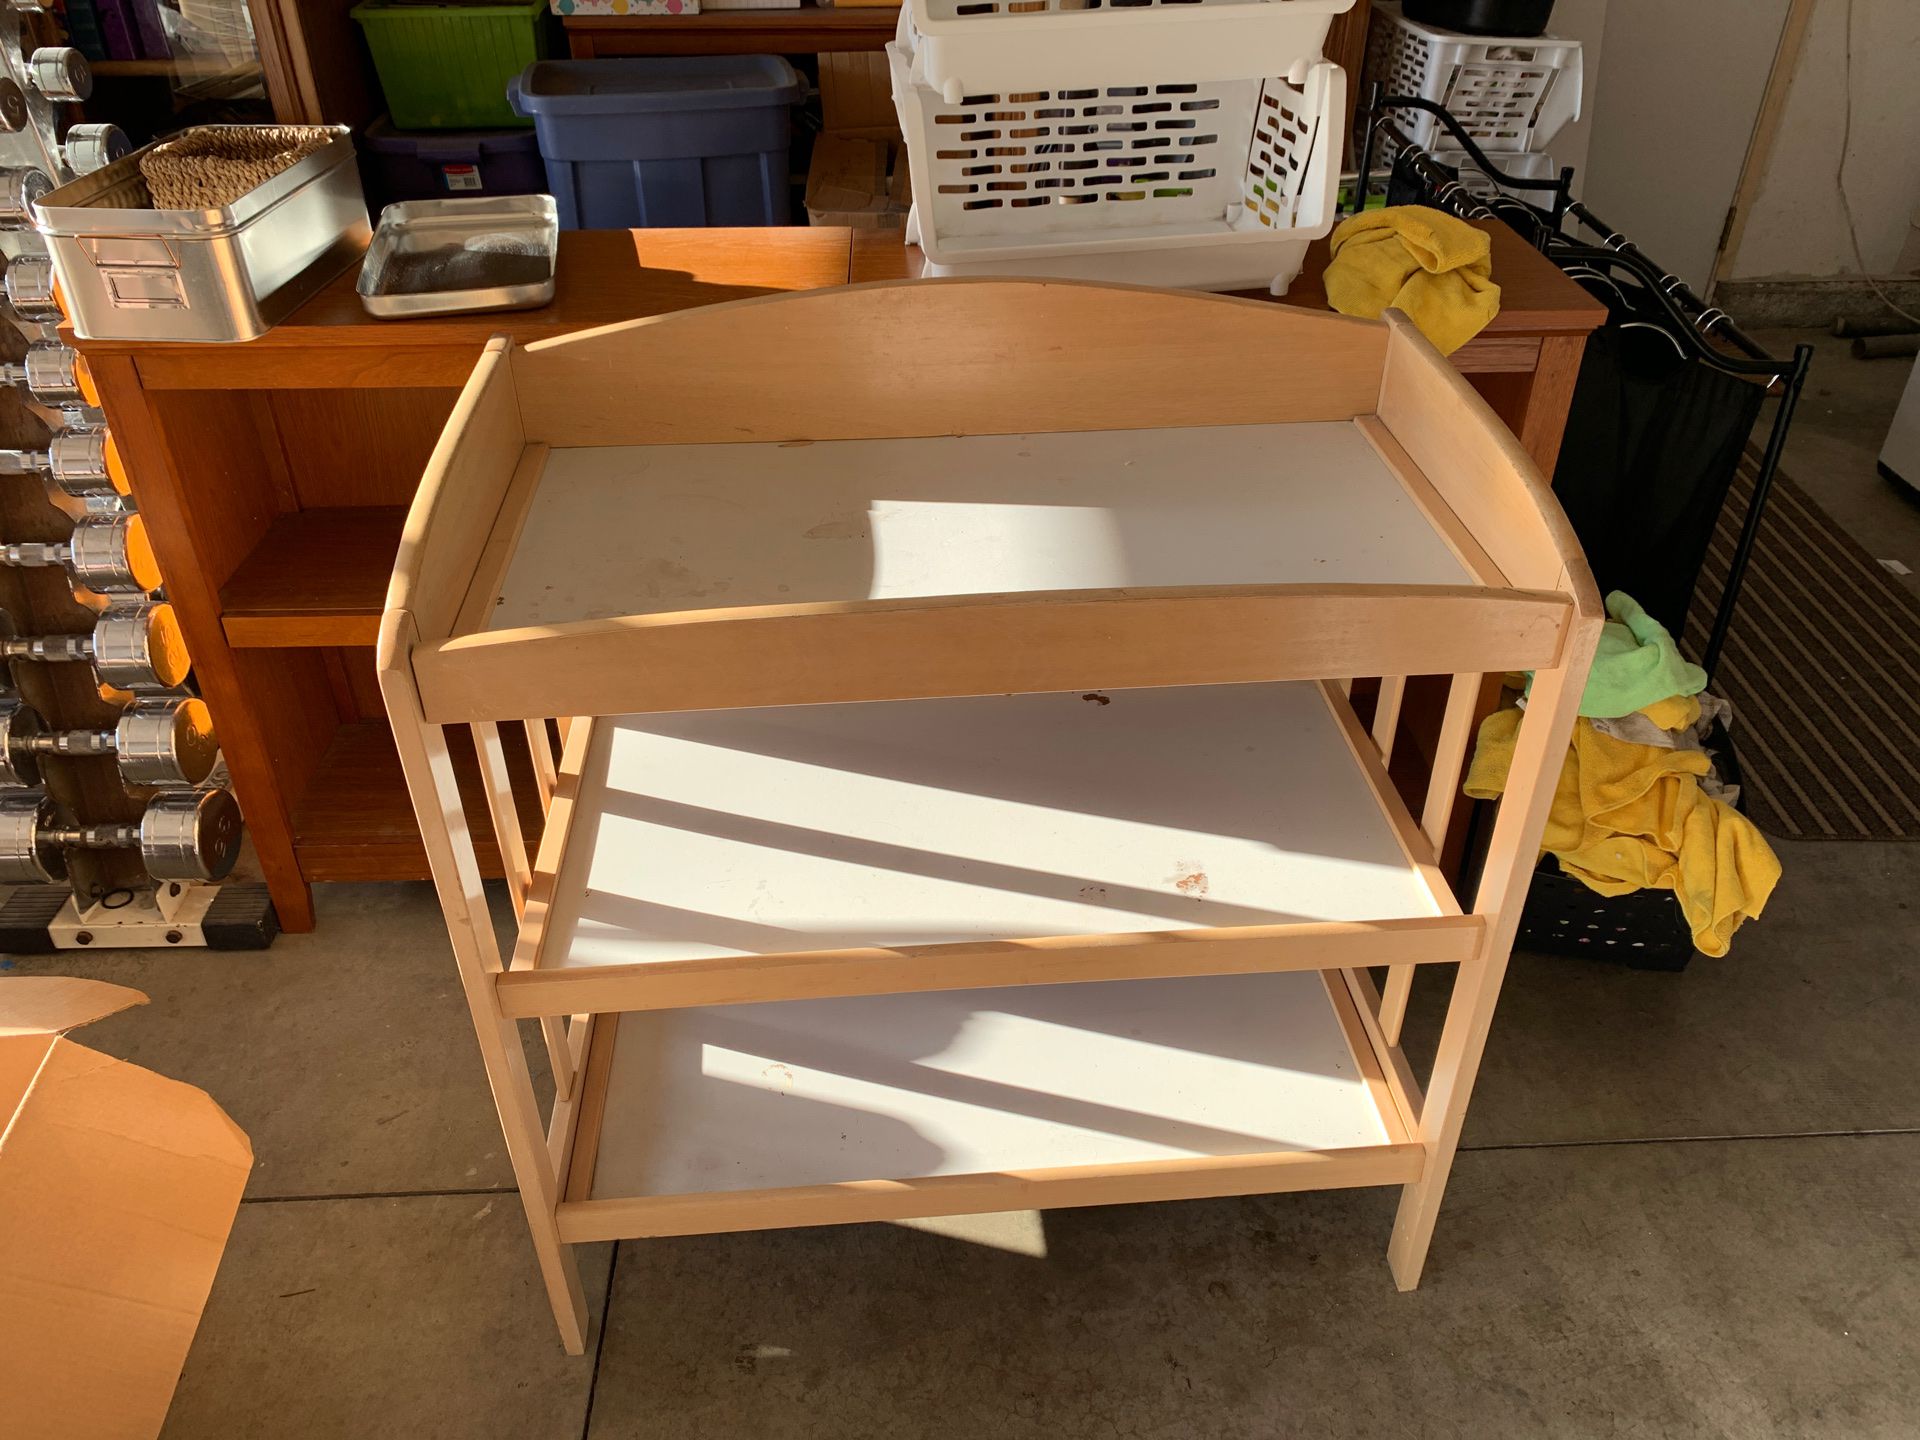 **FREE** Used changing table